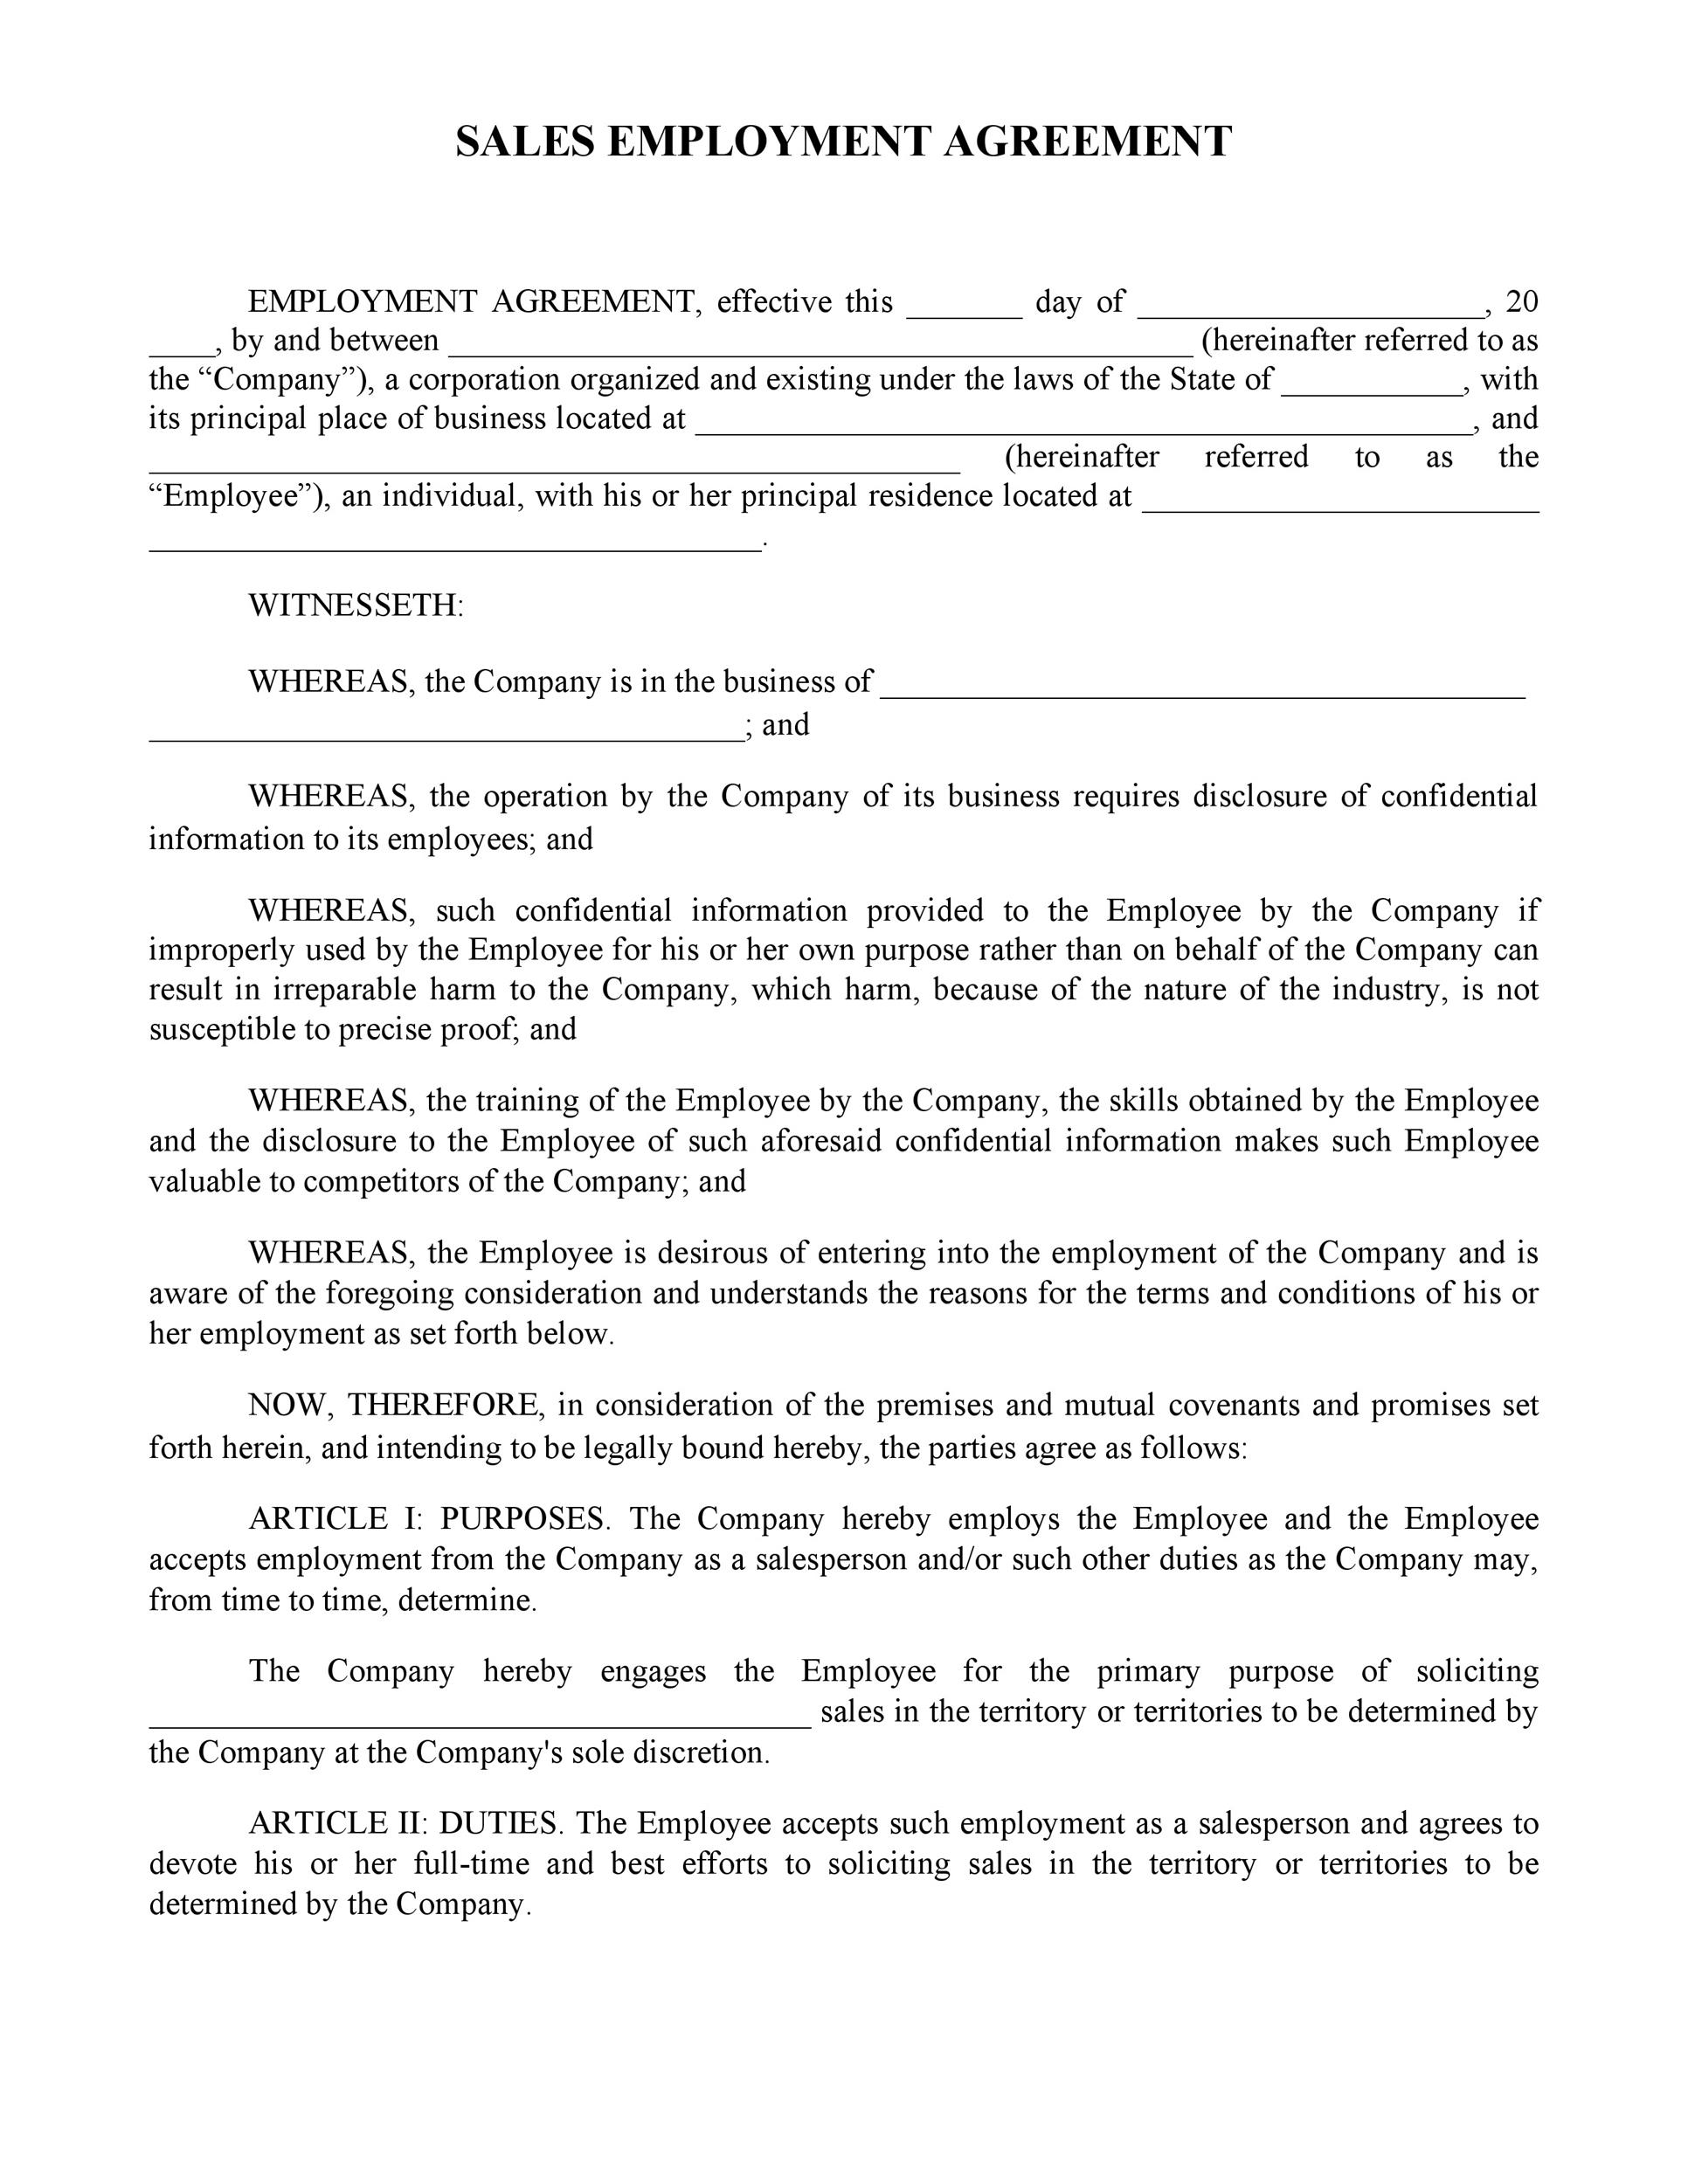 Employment Agreement Template Free Download from templatelab.com